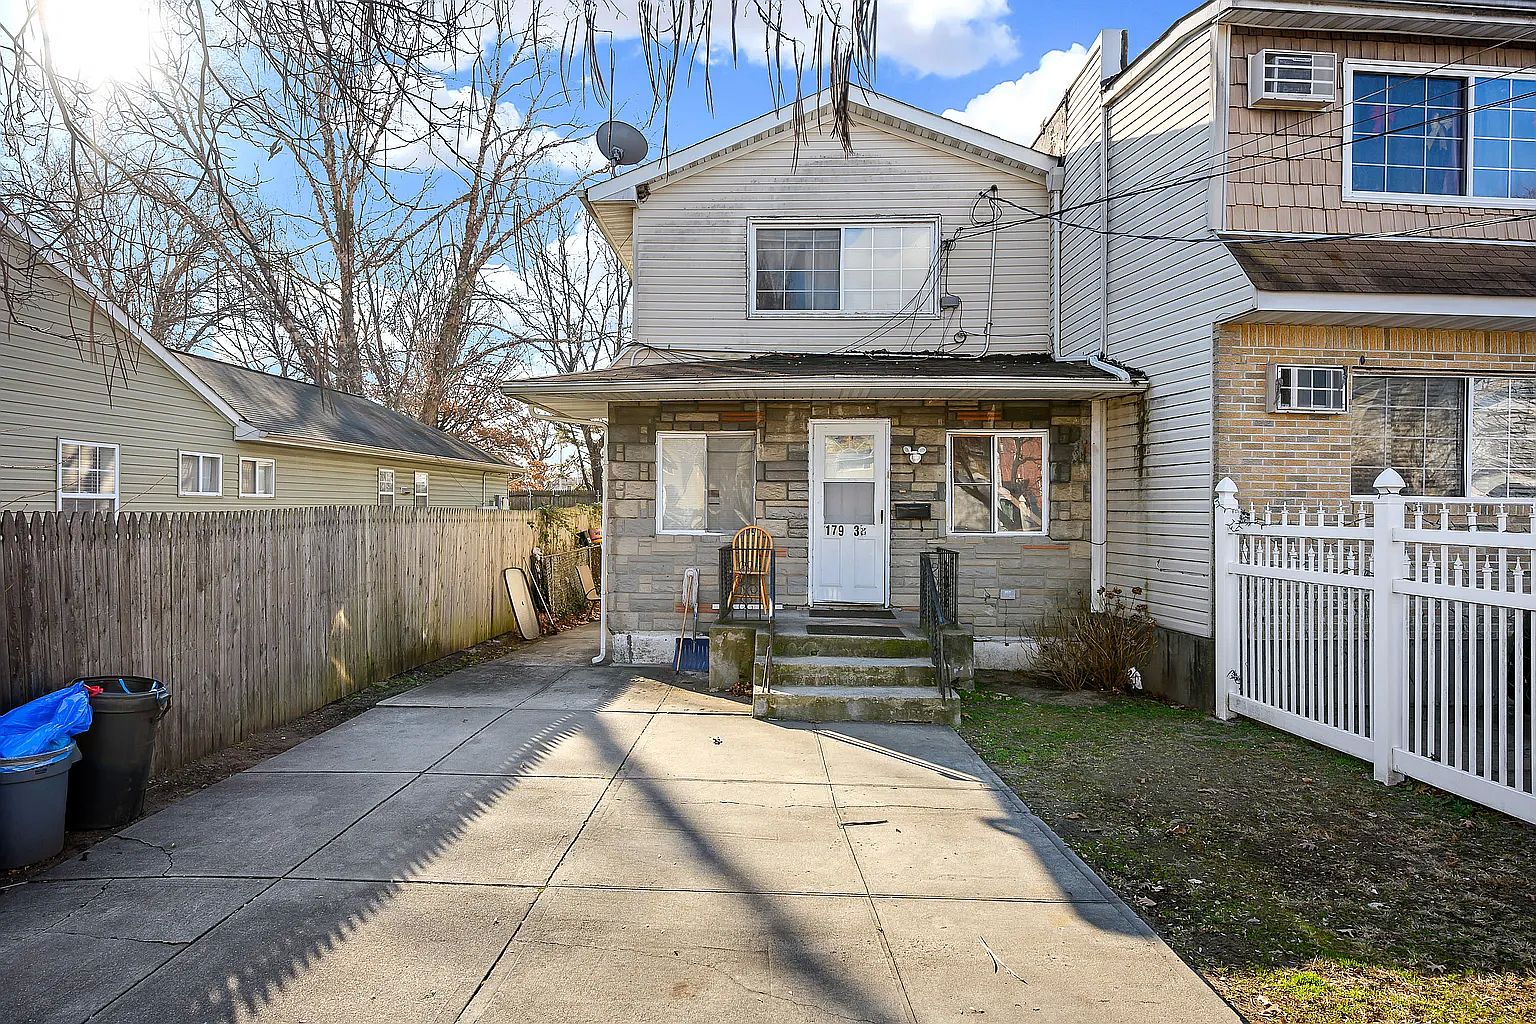 17938 144th Rd, Jamaica, NY 11434 | Zillow